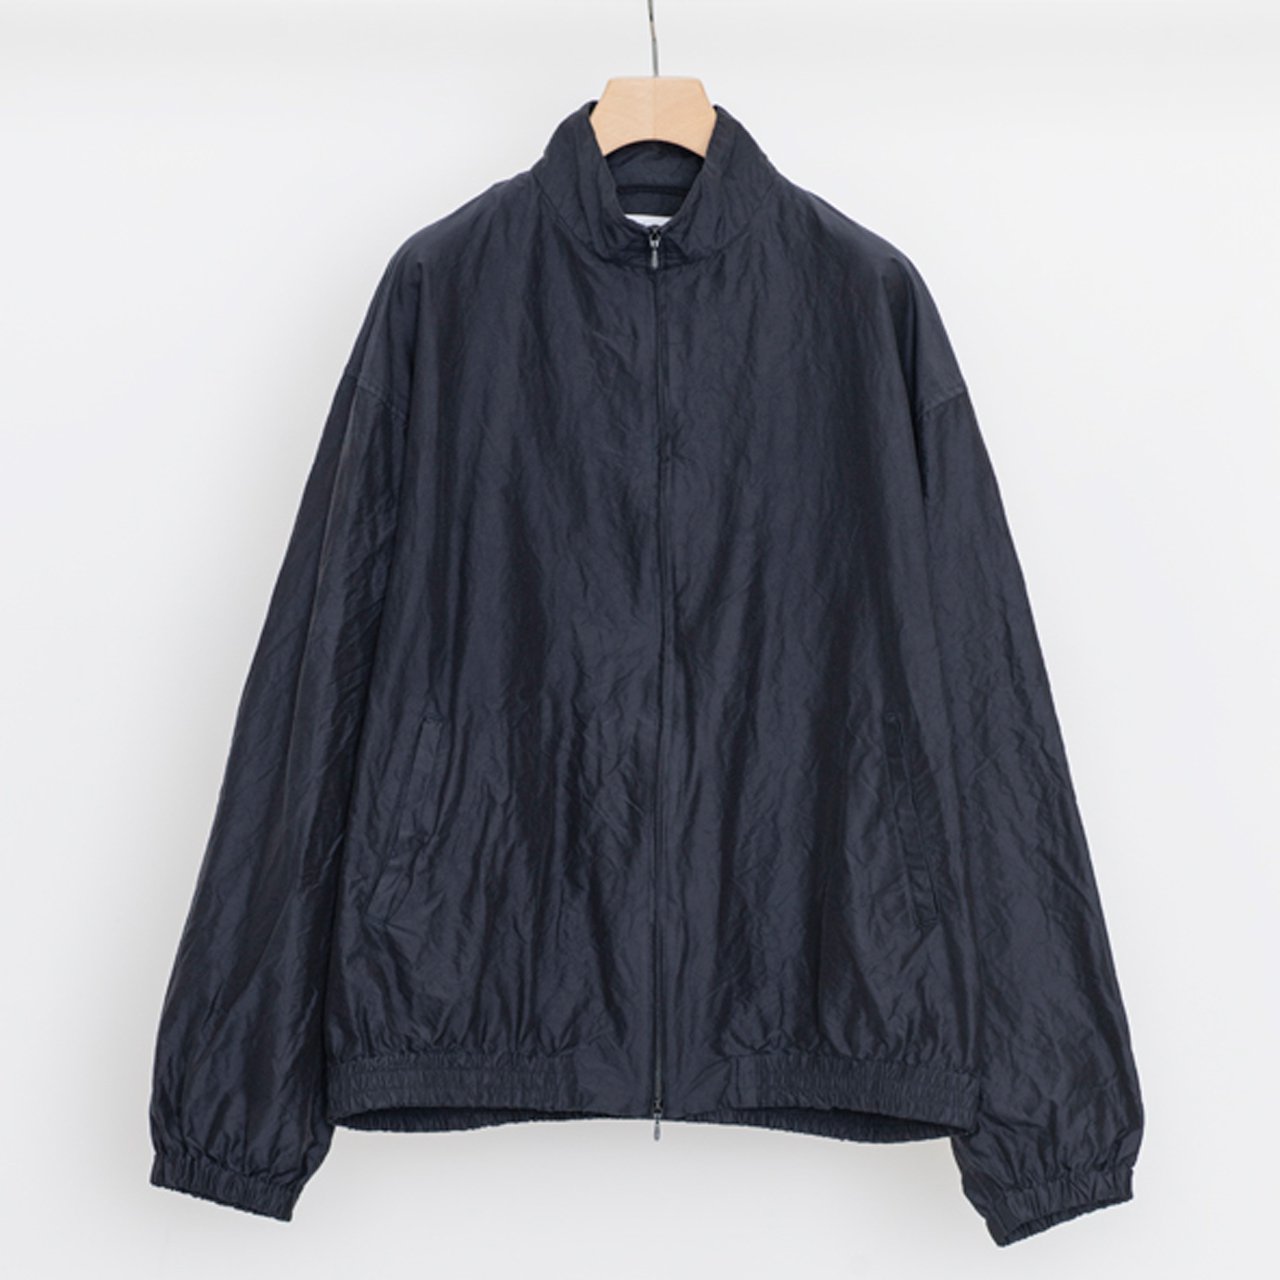 <img class='new_mark_img1' src='https://img.shop-pro.jp/img/new/icons5.gif' style='border:none;display:inline;margin:0px;padding:0px;width:auto;' />marka (マーカ)｜TRUCK JACKET NAVY -ORGANIC COTTON × SILK HIGH COUNT TYPEWRITER-